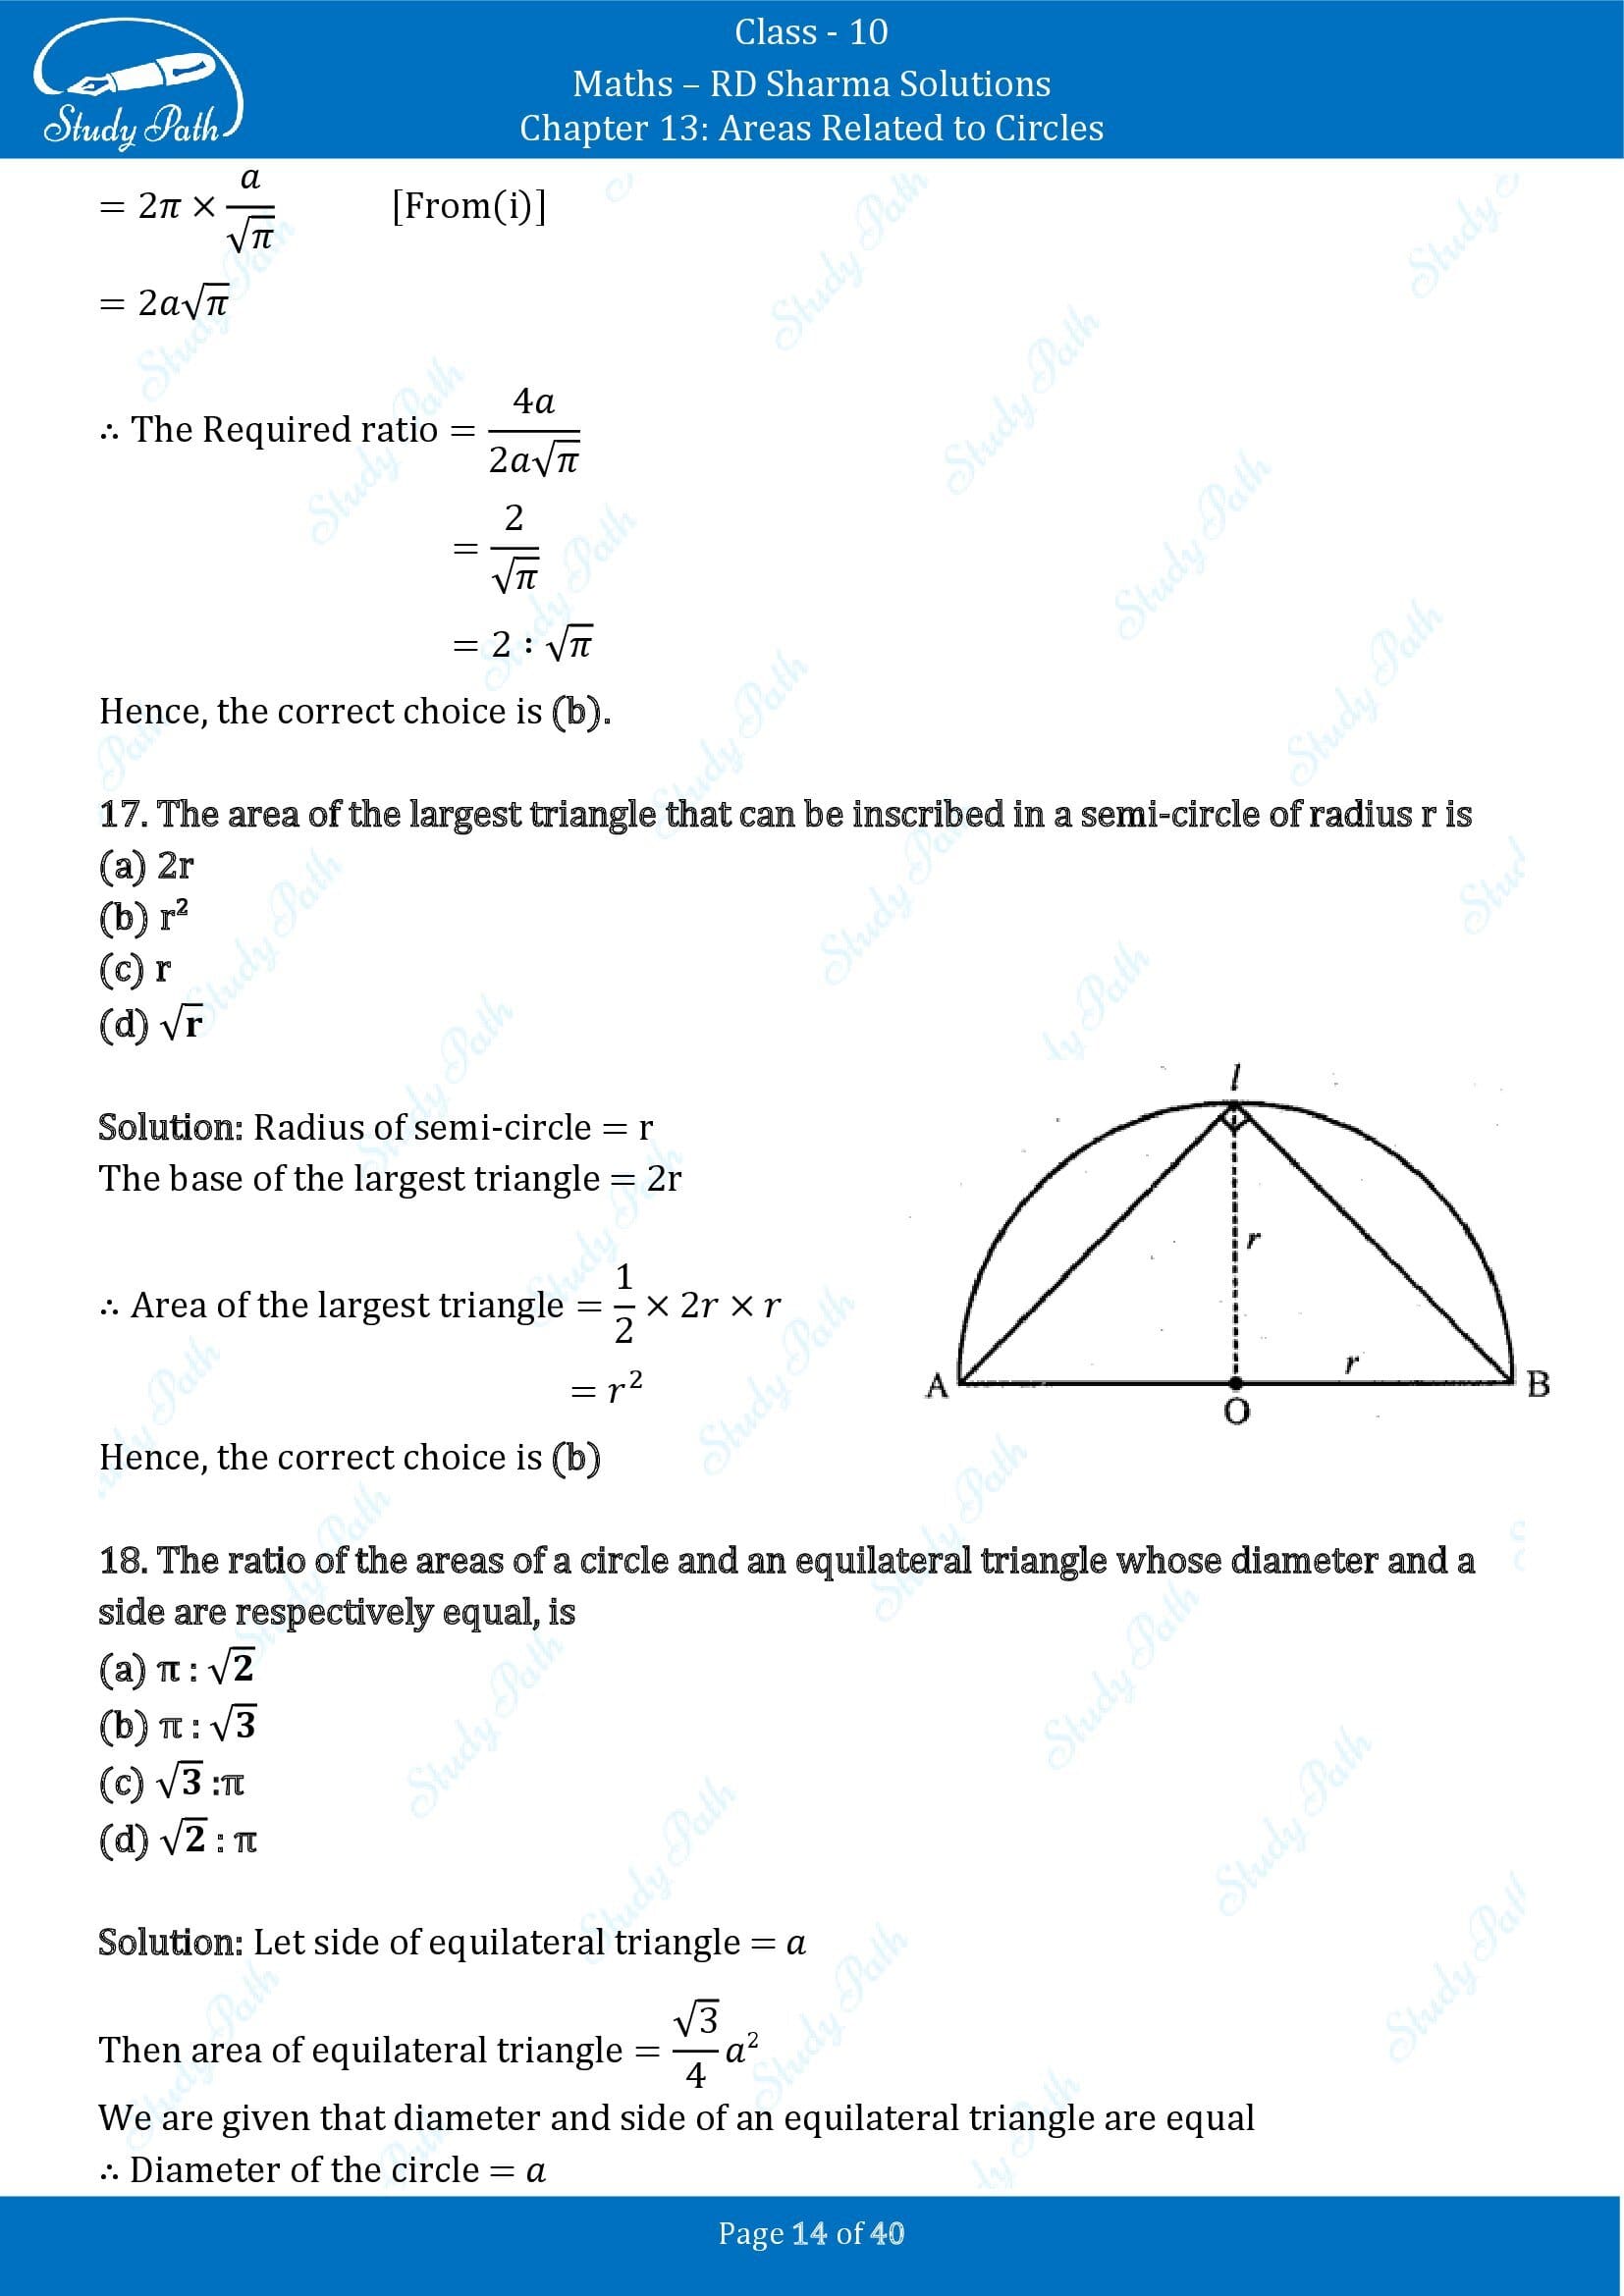 RD Sharma Solutions Class 10 Chapter 13 Areas Related to Circles Multiple Choice Question MCQs 00014